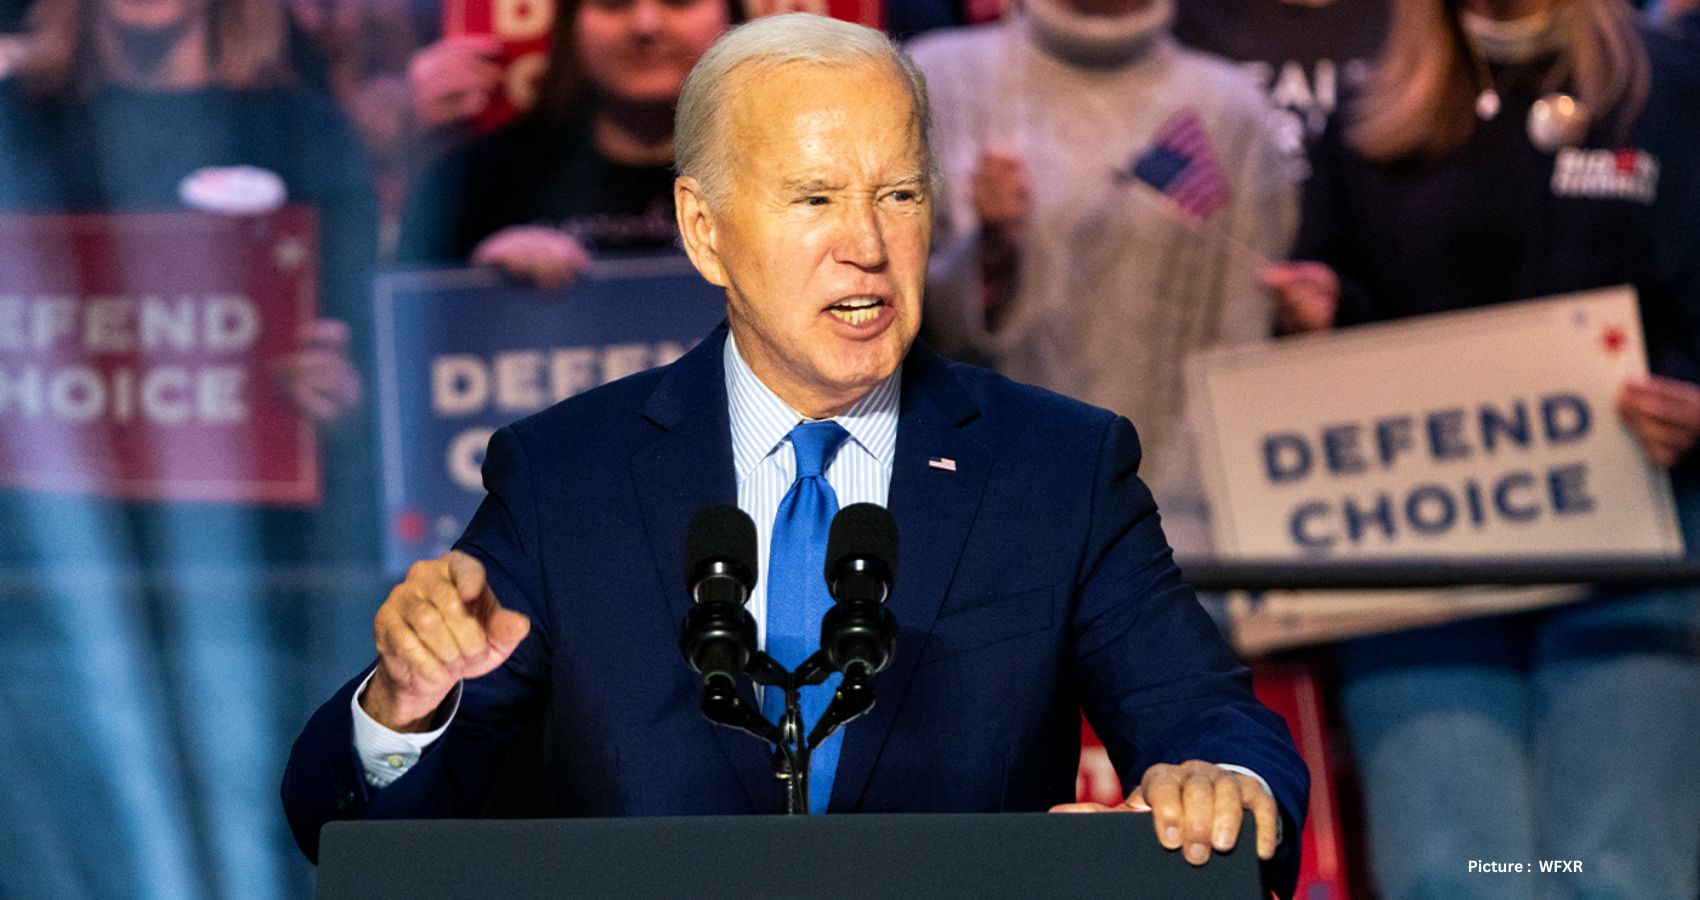 Democrats Strategize Amidst Political Turmoil: Biden’s Allies React to Special Counsel’s Report Fallout